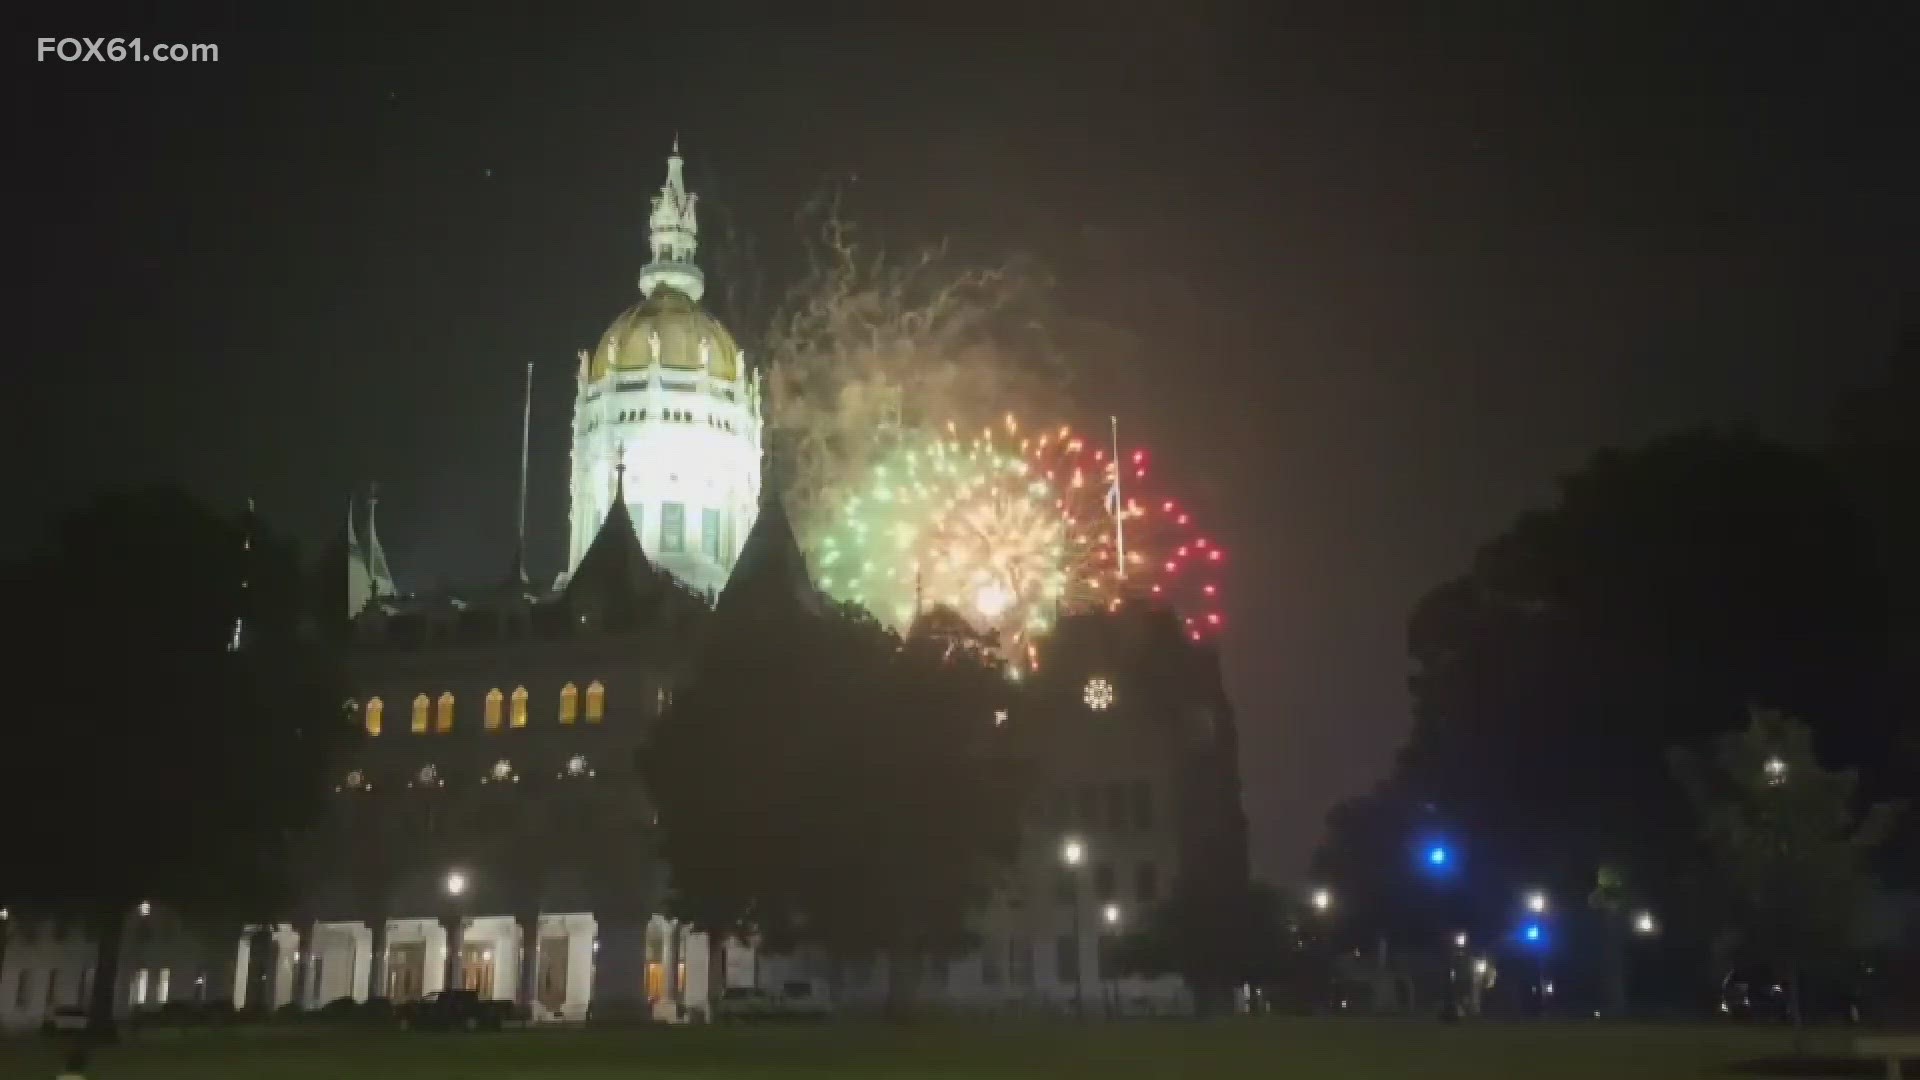 This year’s celebration invites everyone to enjoy the best of Downtown Hartford as the celebration takes place from 2 p.m. to midnight fireworks!